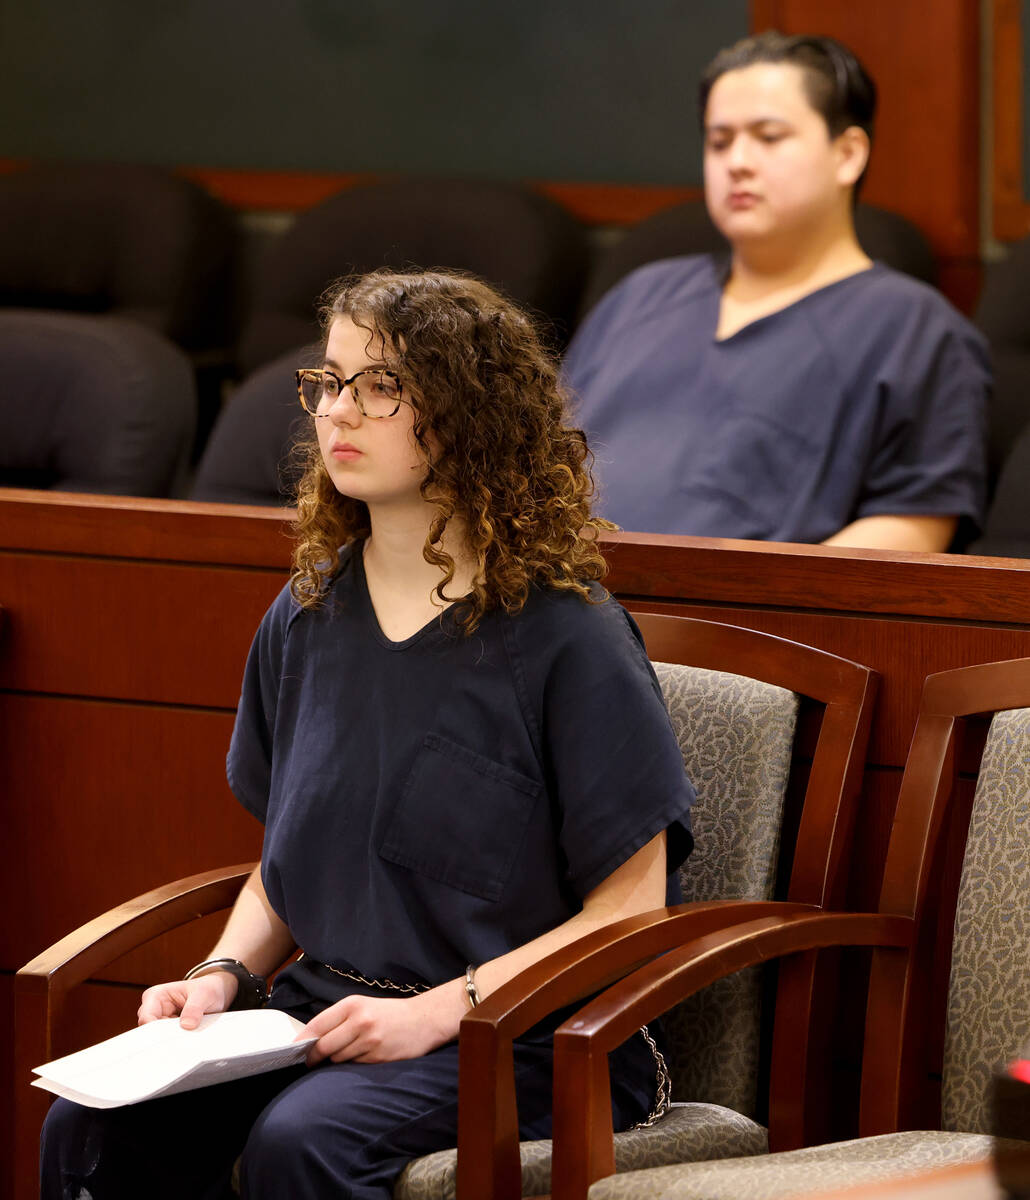 Sierra Halseth and Aaron Guerrero wait in court for her sentencing at the Regional Justice Cent ...